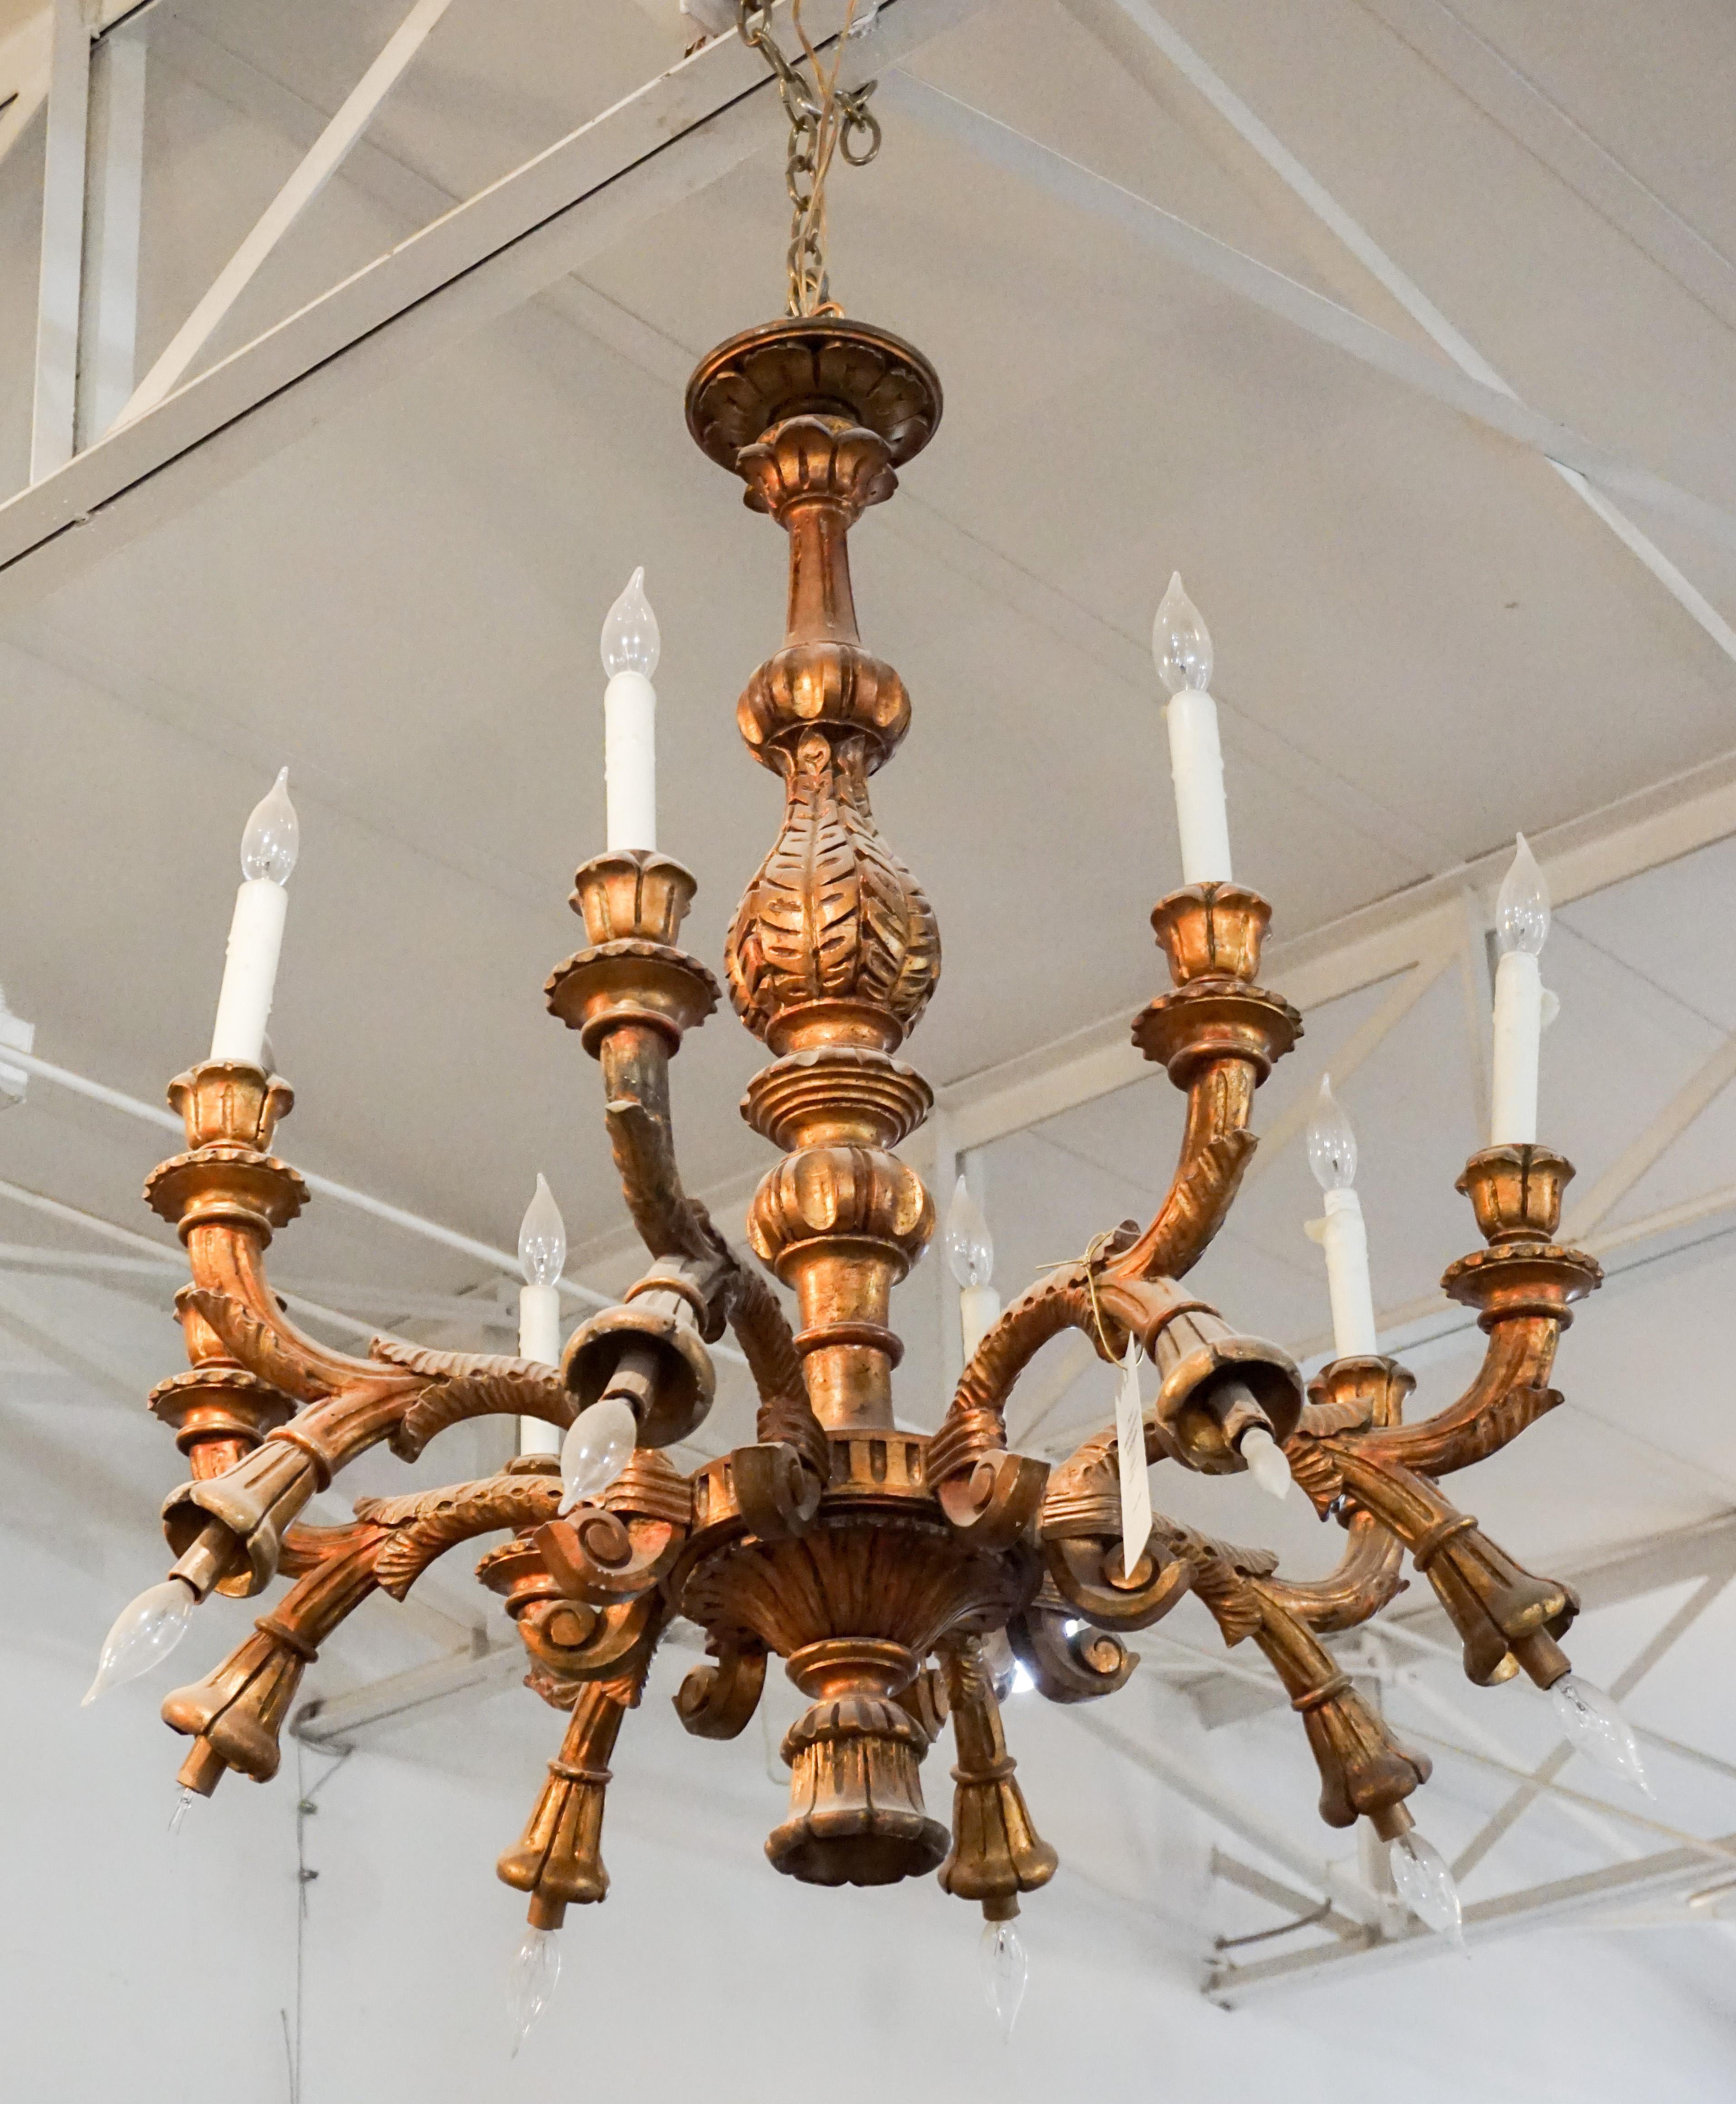 This antique wooden chandelier features eight arms and beautiful carvings. Wired and ready for install, originates from France, circa 1900.

Measurements: 34'' W x 40'' H.